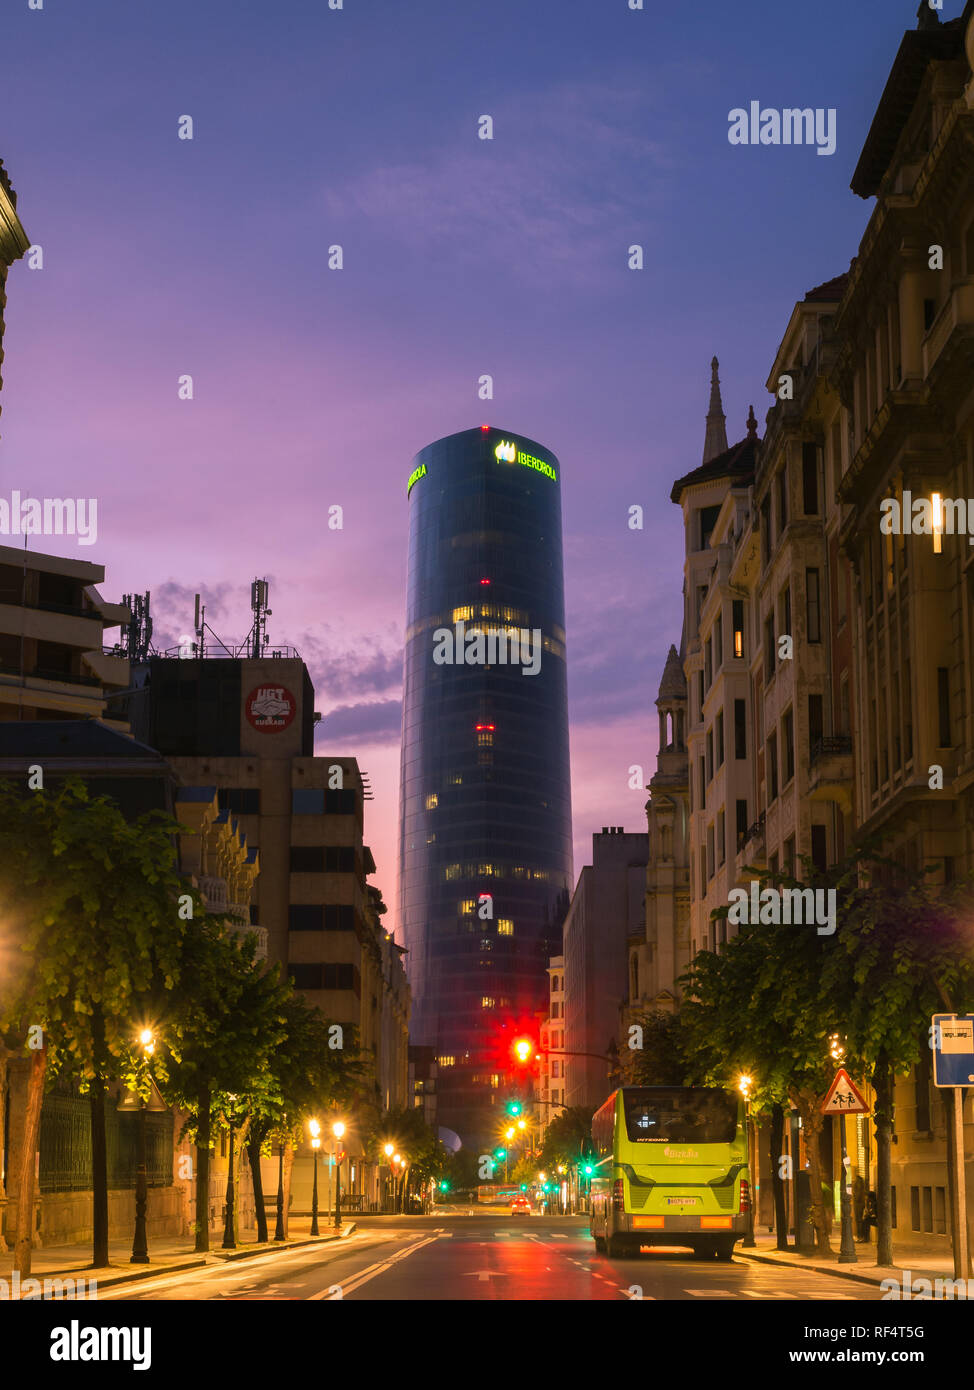 BILBAO, SPAIN - JUlY 08: Iberdrola Tower at sunset in Bilbao, Spain on July 08, 2018. The 165m tower was inaugurated in 2012 and is the highest buildi Stock Photo